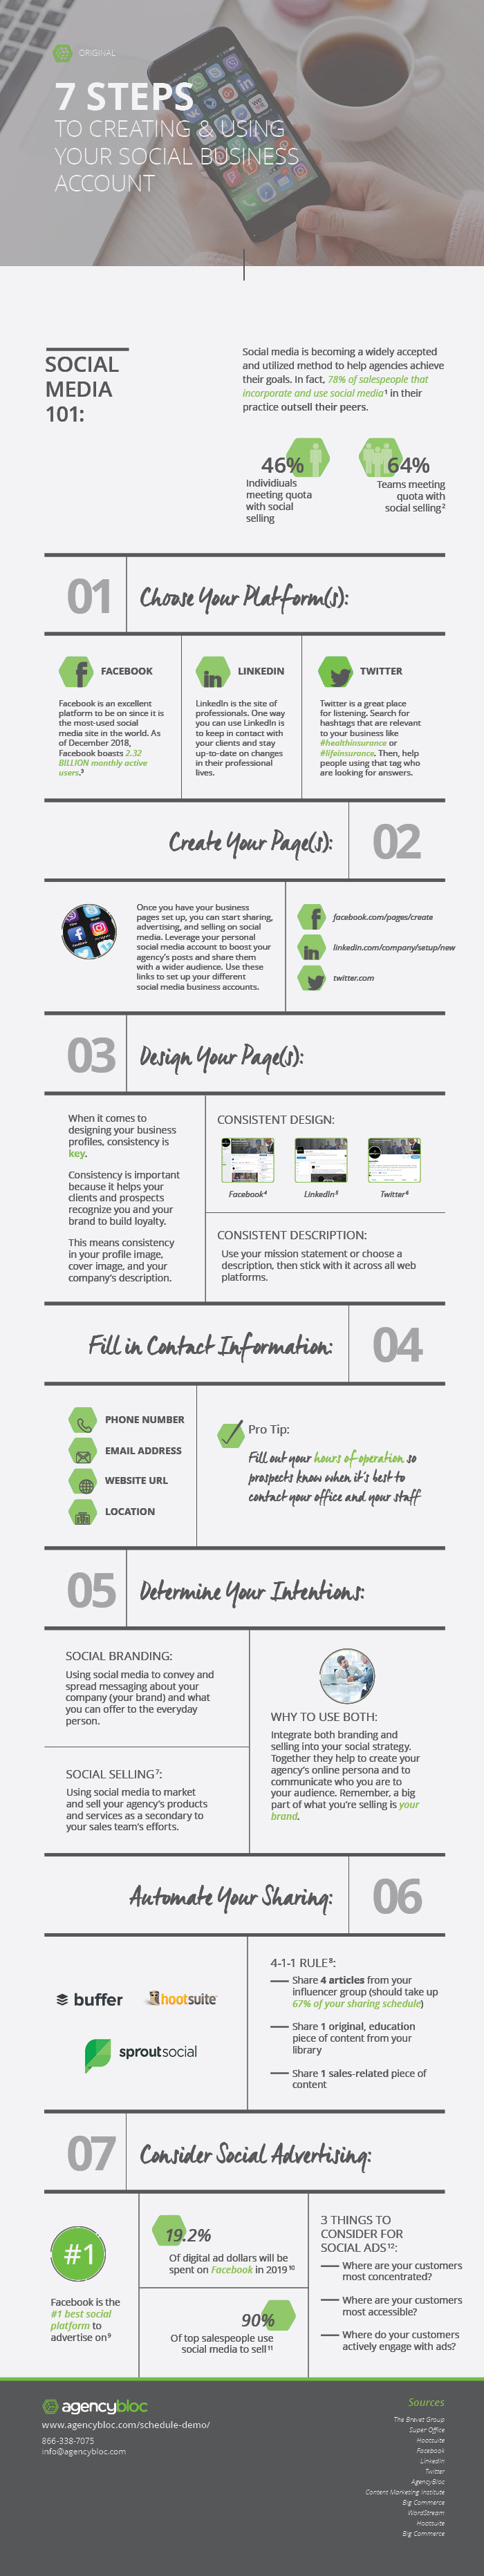 Infographic | 7 Steps to Creating & Using Your Social Business Account